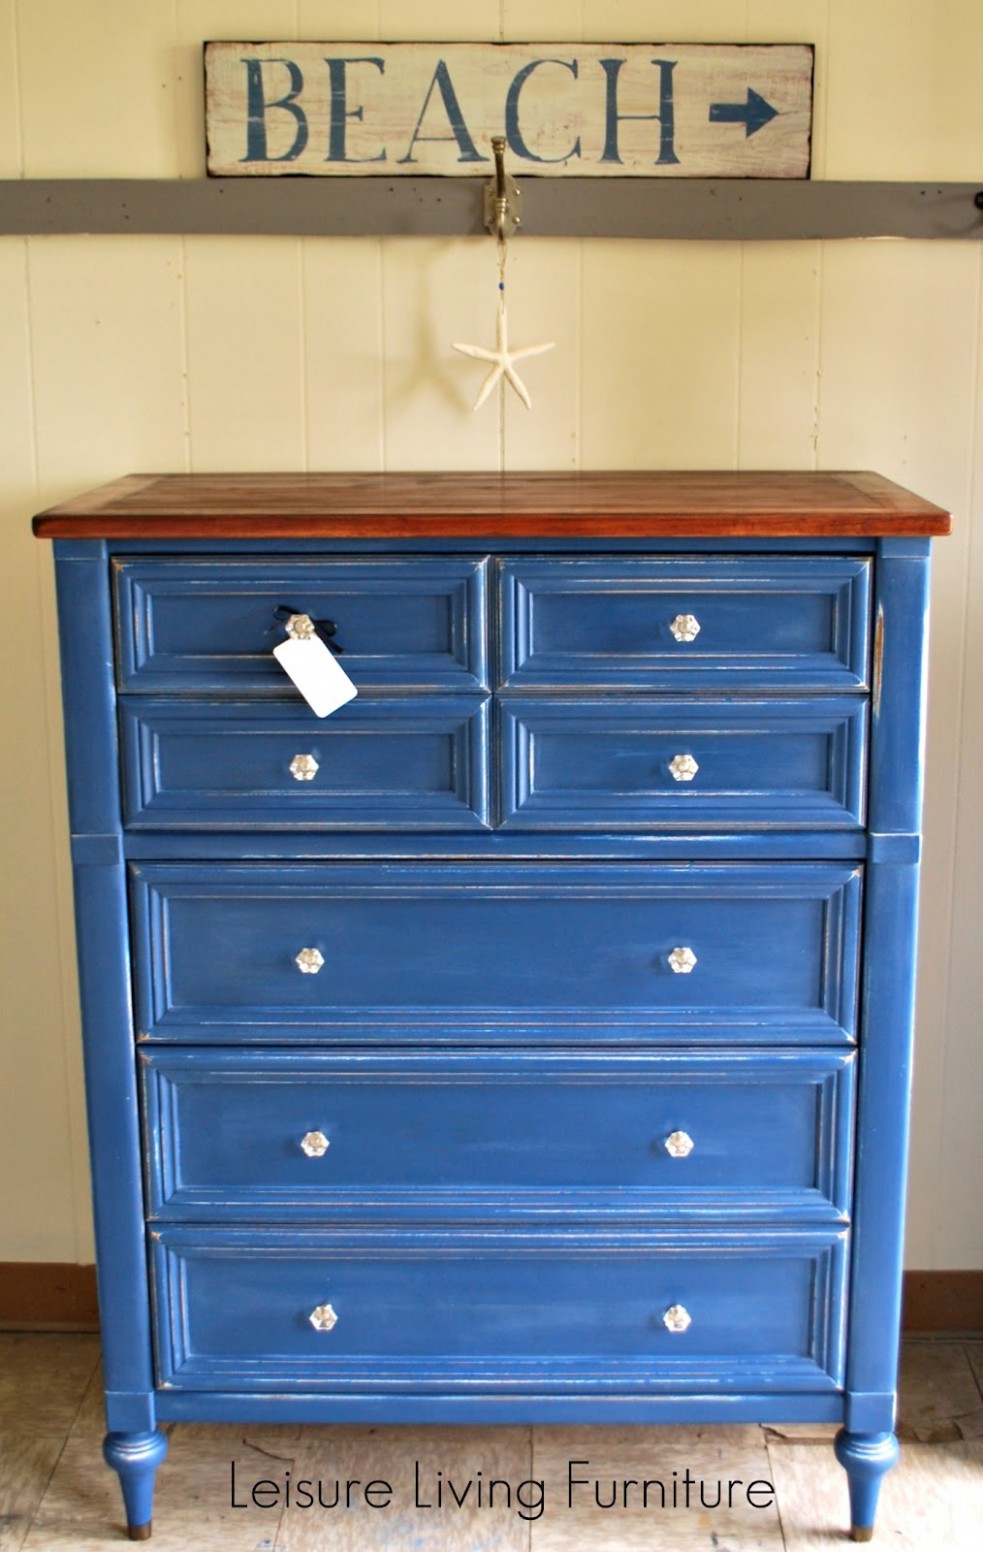 Annie Sloan Chalk Paint | Refreshed Finds Junkies Annie Sloan Chalk Paint Online Bestellen